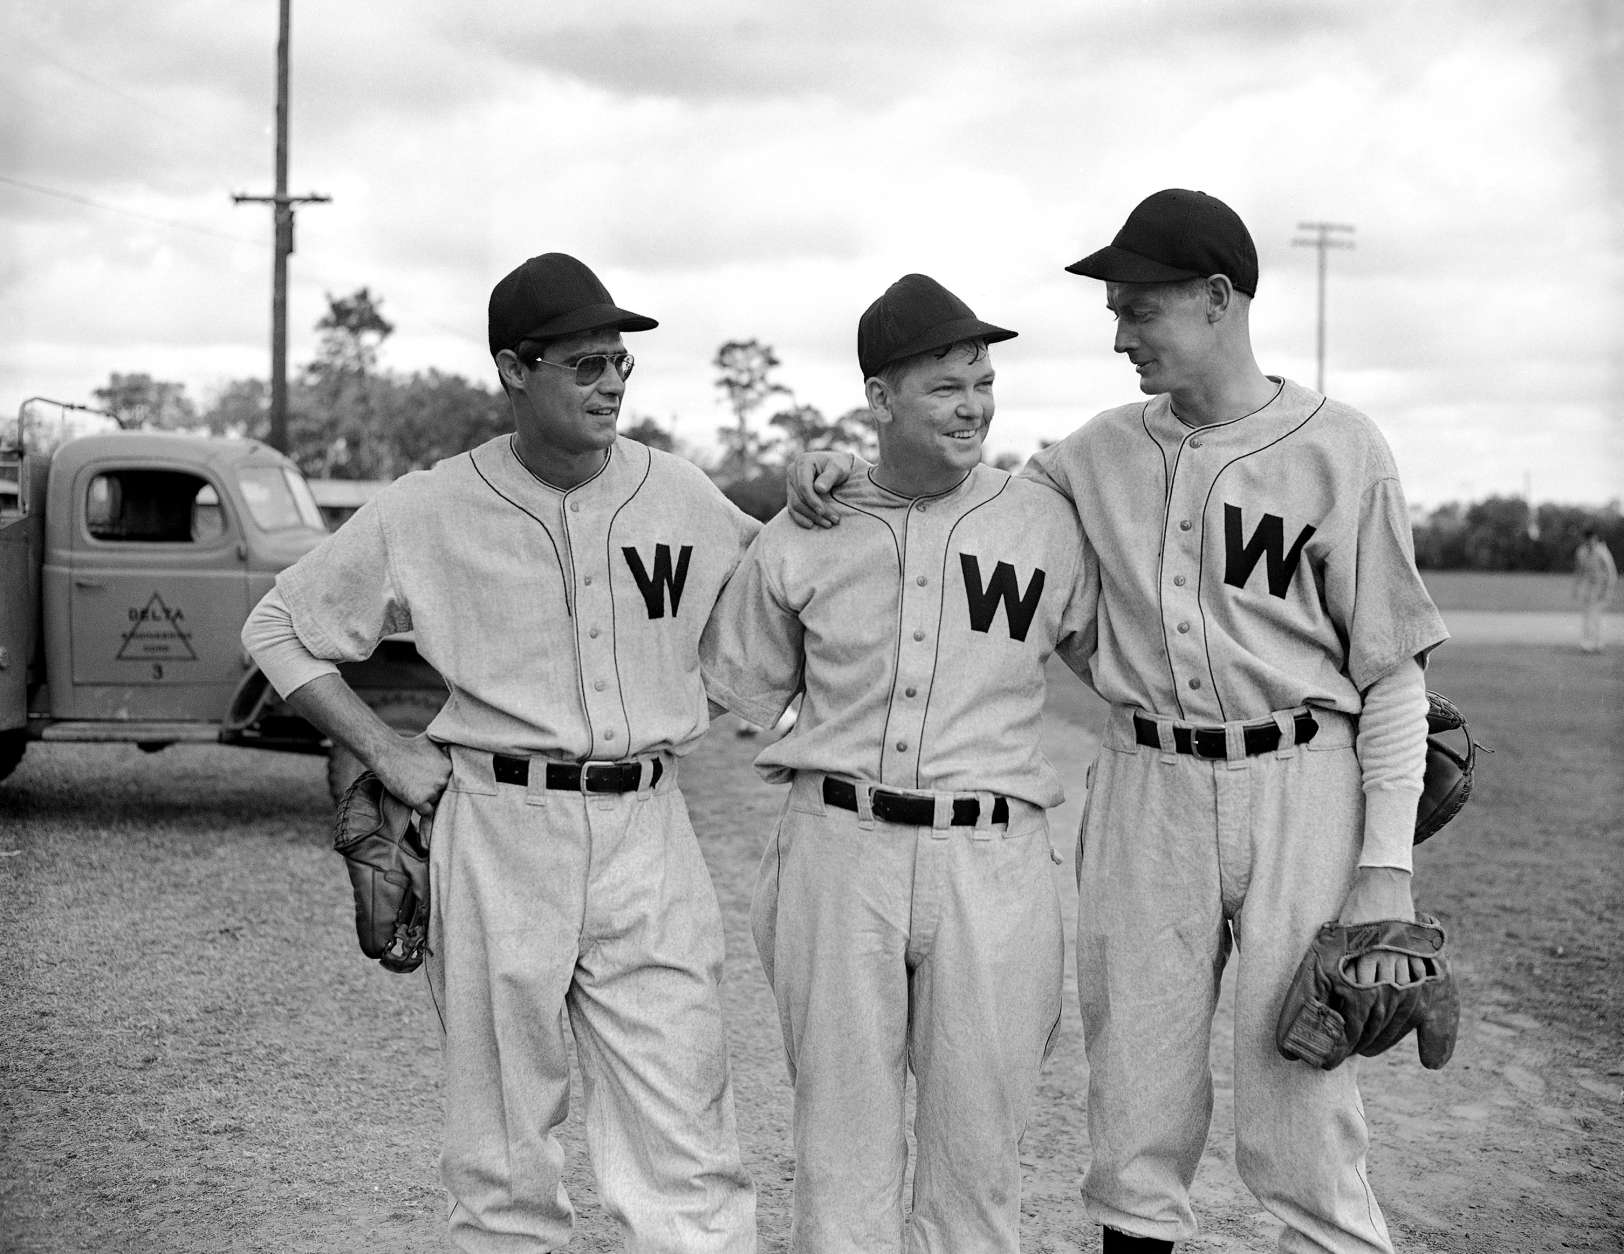 Three veterans of the World War stop to chat as the Washington Senators open their spring training at Orlando, Florida on Feb. 19, 1946. From left to right are Walter Masterson, pitcher, of Washington, D.C., Danny Reagan, catcher, of Los Angeles, Calif., and Sidney Hudson, pitcher, of Chattanooga, Tennessee. (AP Photo)